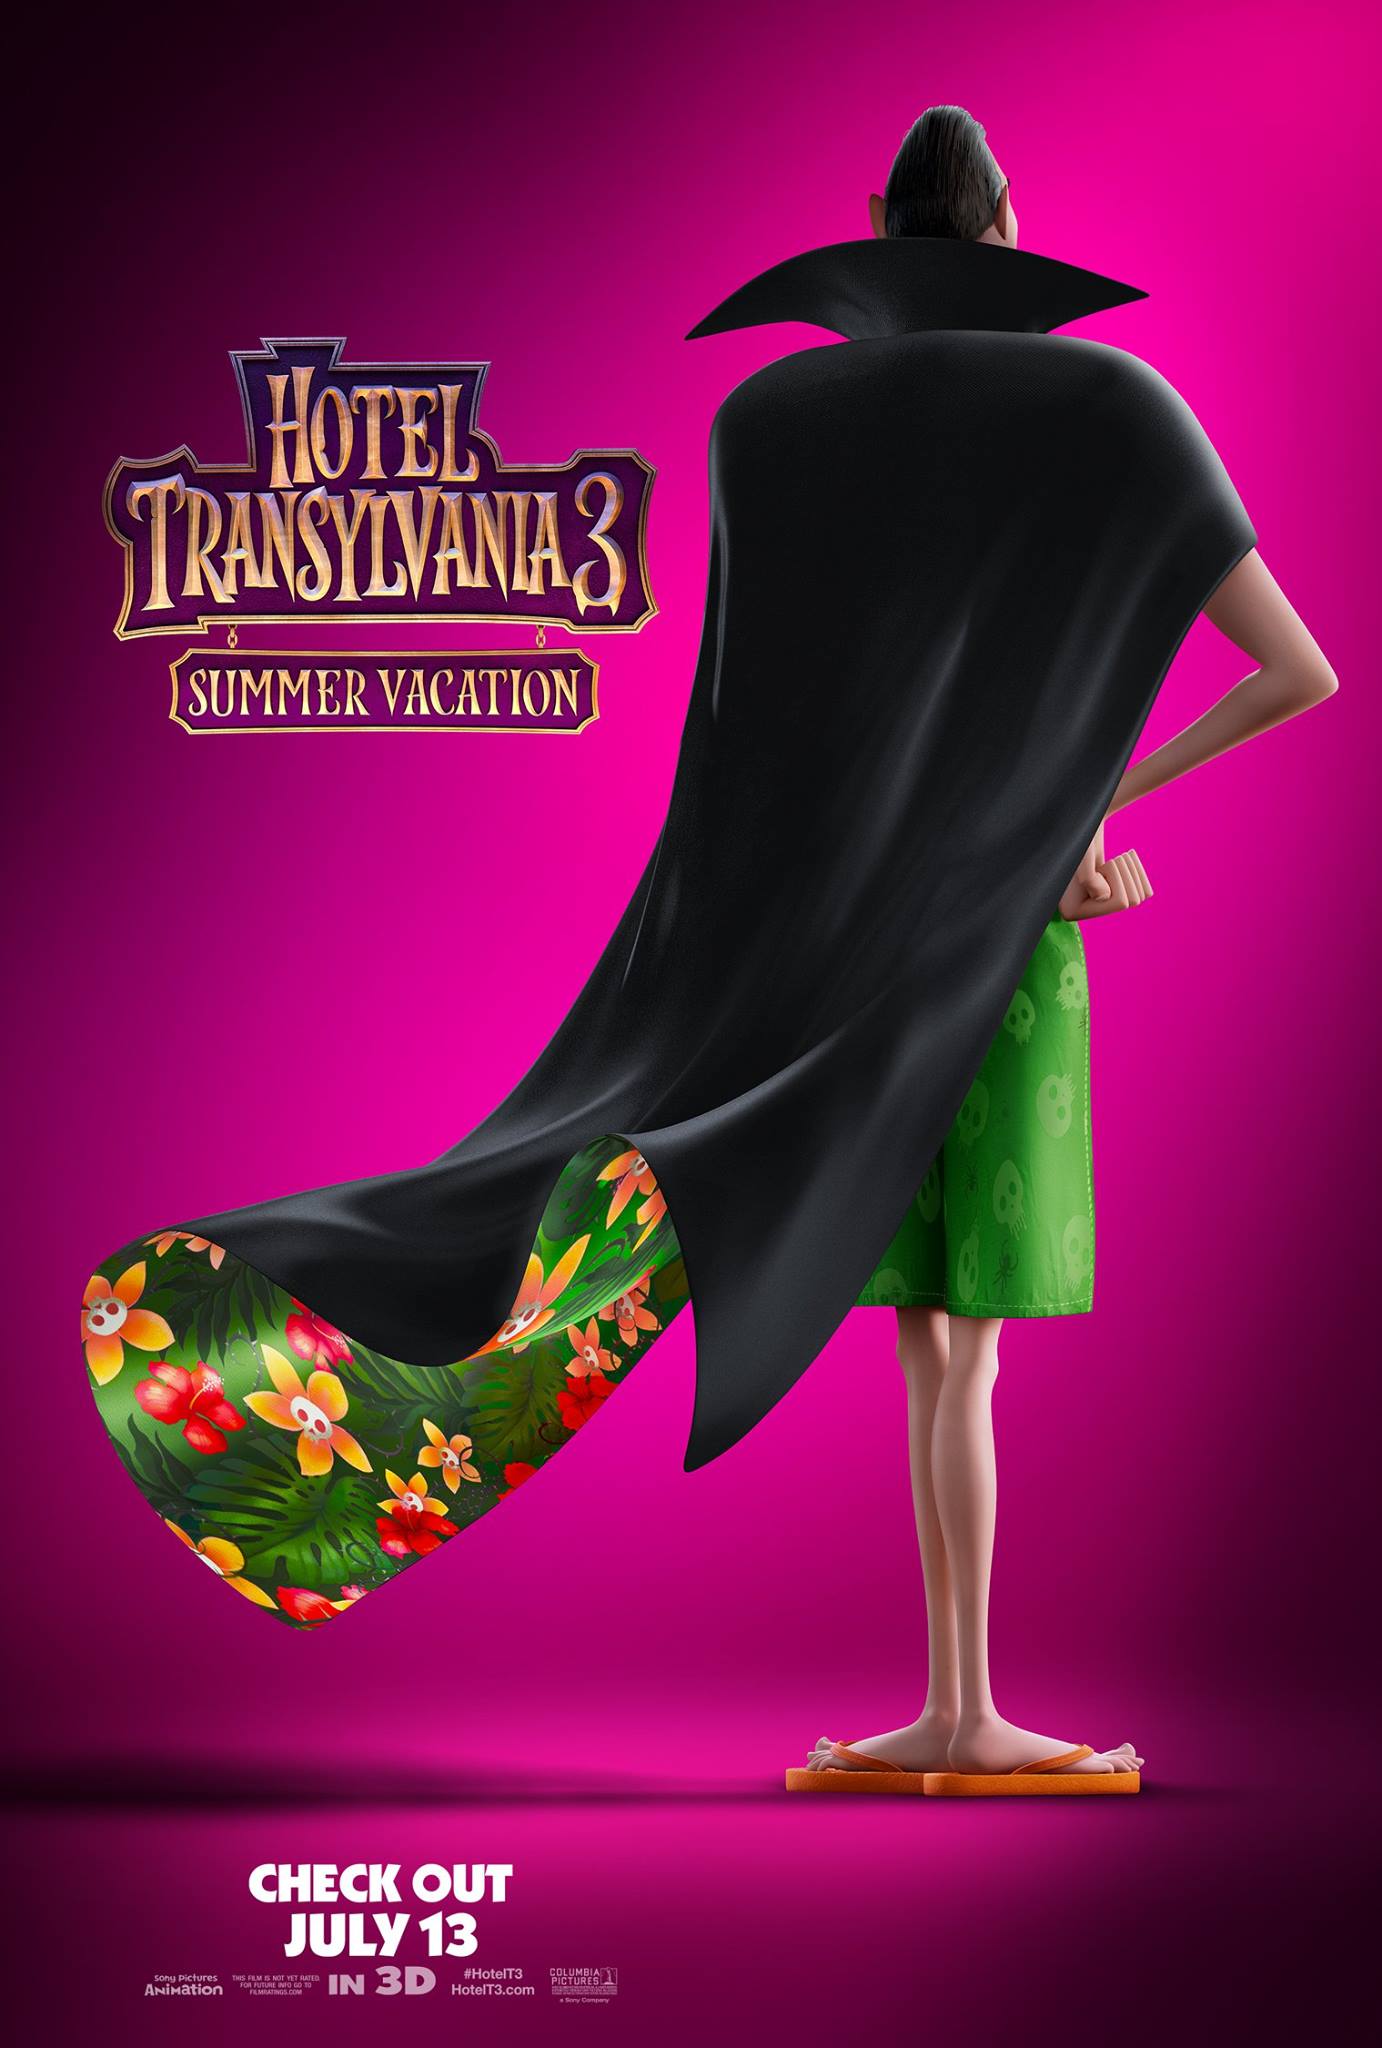 Hotel Transylvania 3: Trailer, Release Date, Cast, and Poster | Den of Geek